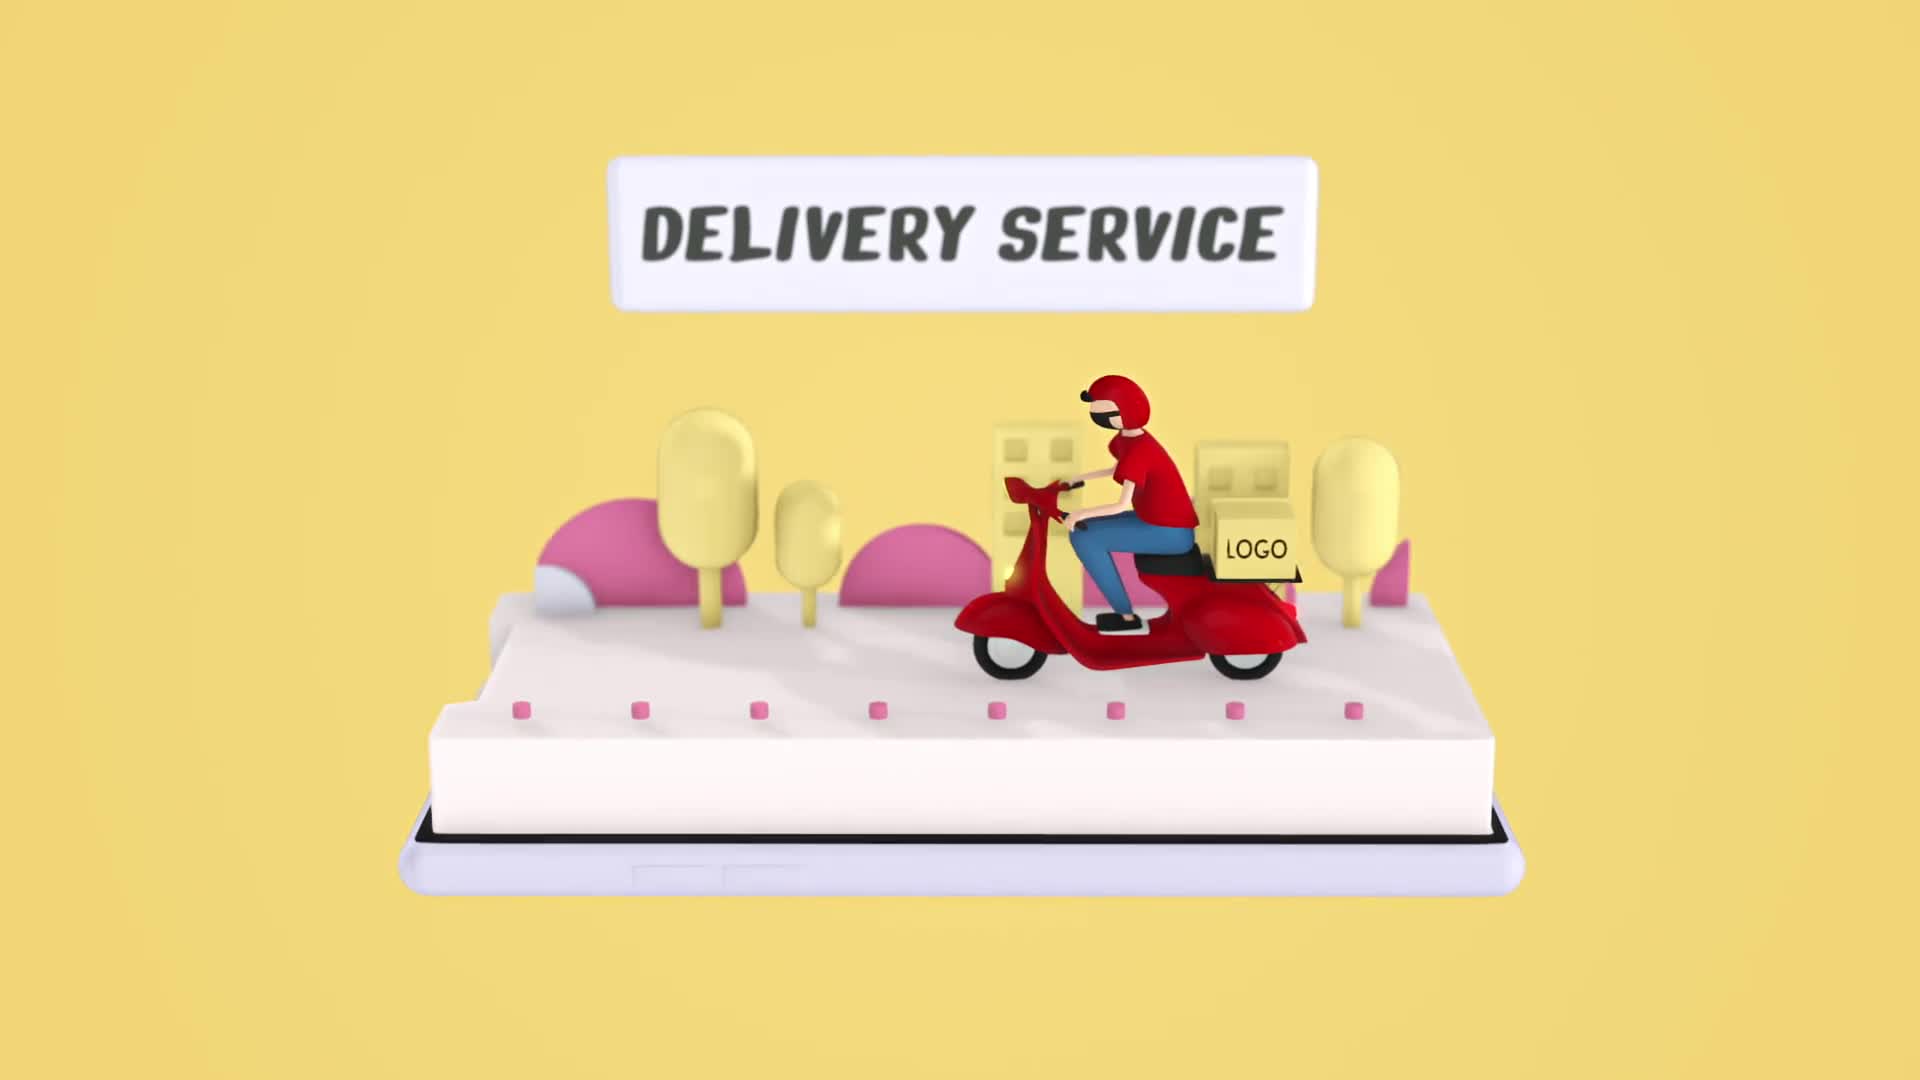  Delivery Service 